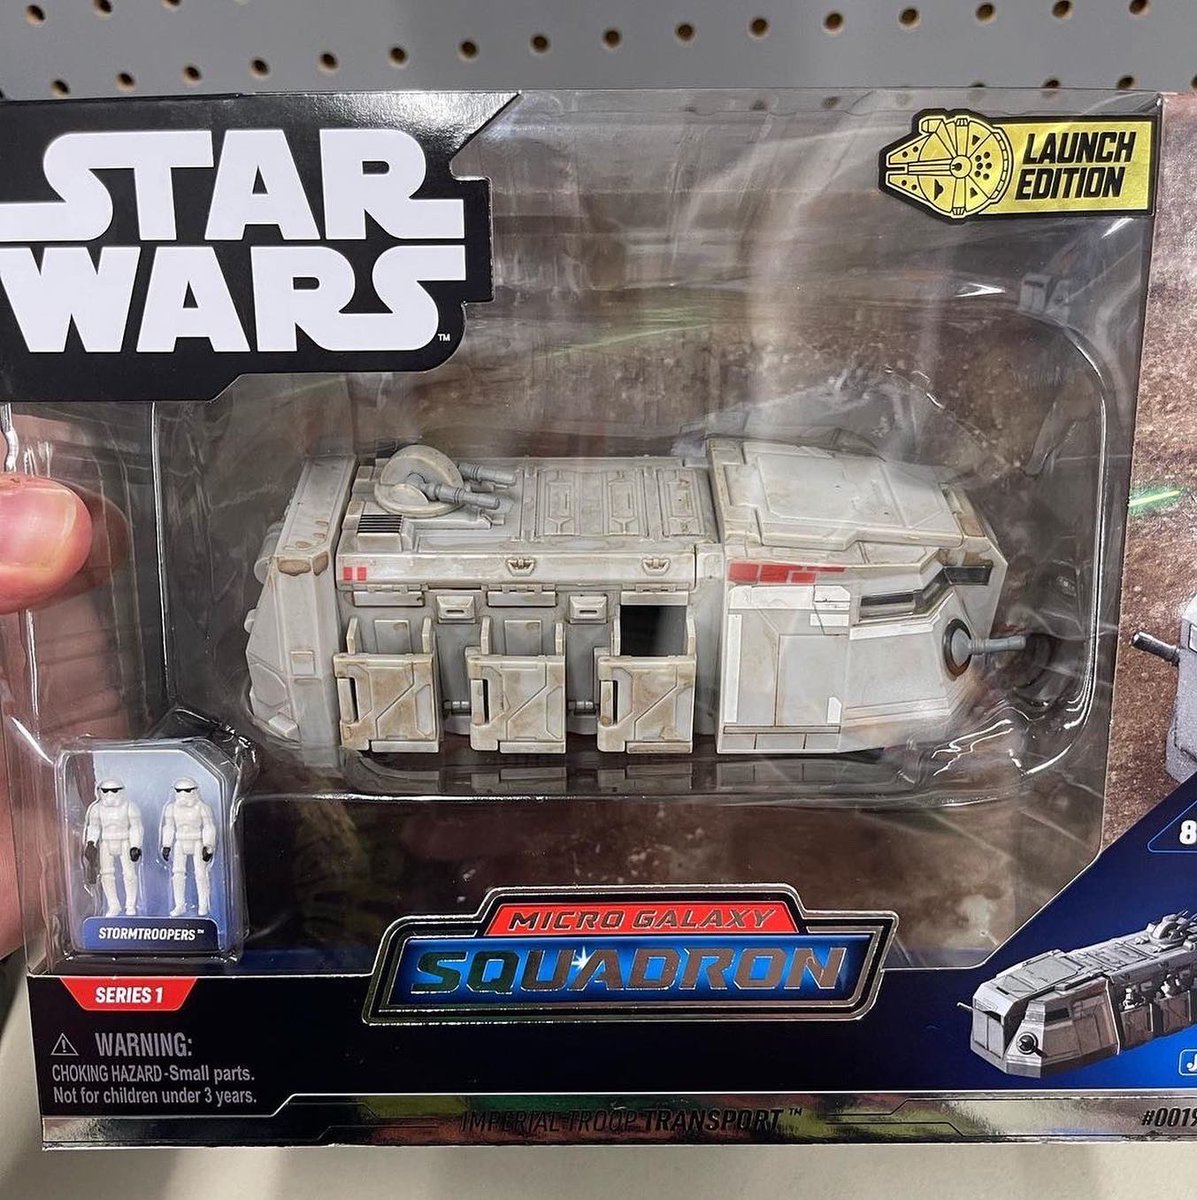 SW MICRO GALAXY AT WALMART!

Thanks to toyhunternj on IG for sharing his find of several of the new @Jazwares Star Wars Micro Galaxy Squadron sets from Walmart in NJ!

#jazwares #jazwarestoys #milleniumfalcon #razorcrest #tiefighter #slave1 #xwing #starwars  #starwarstoys #toys